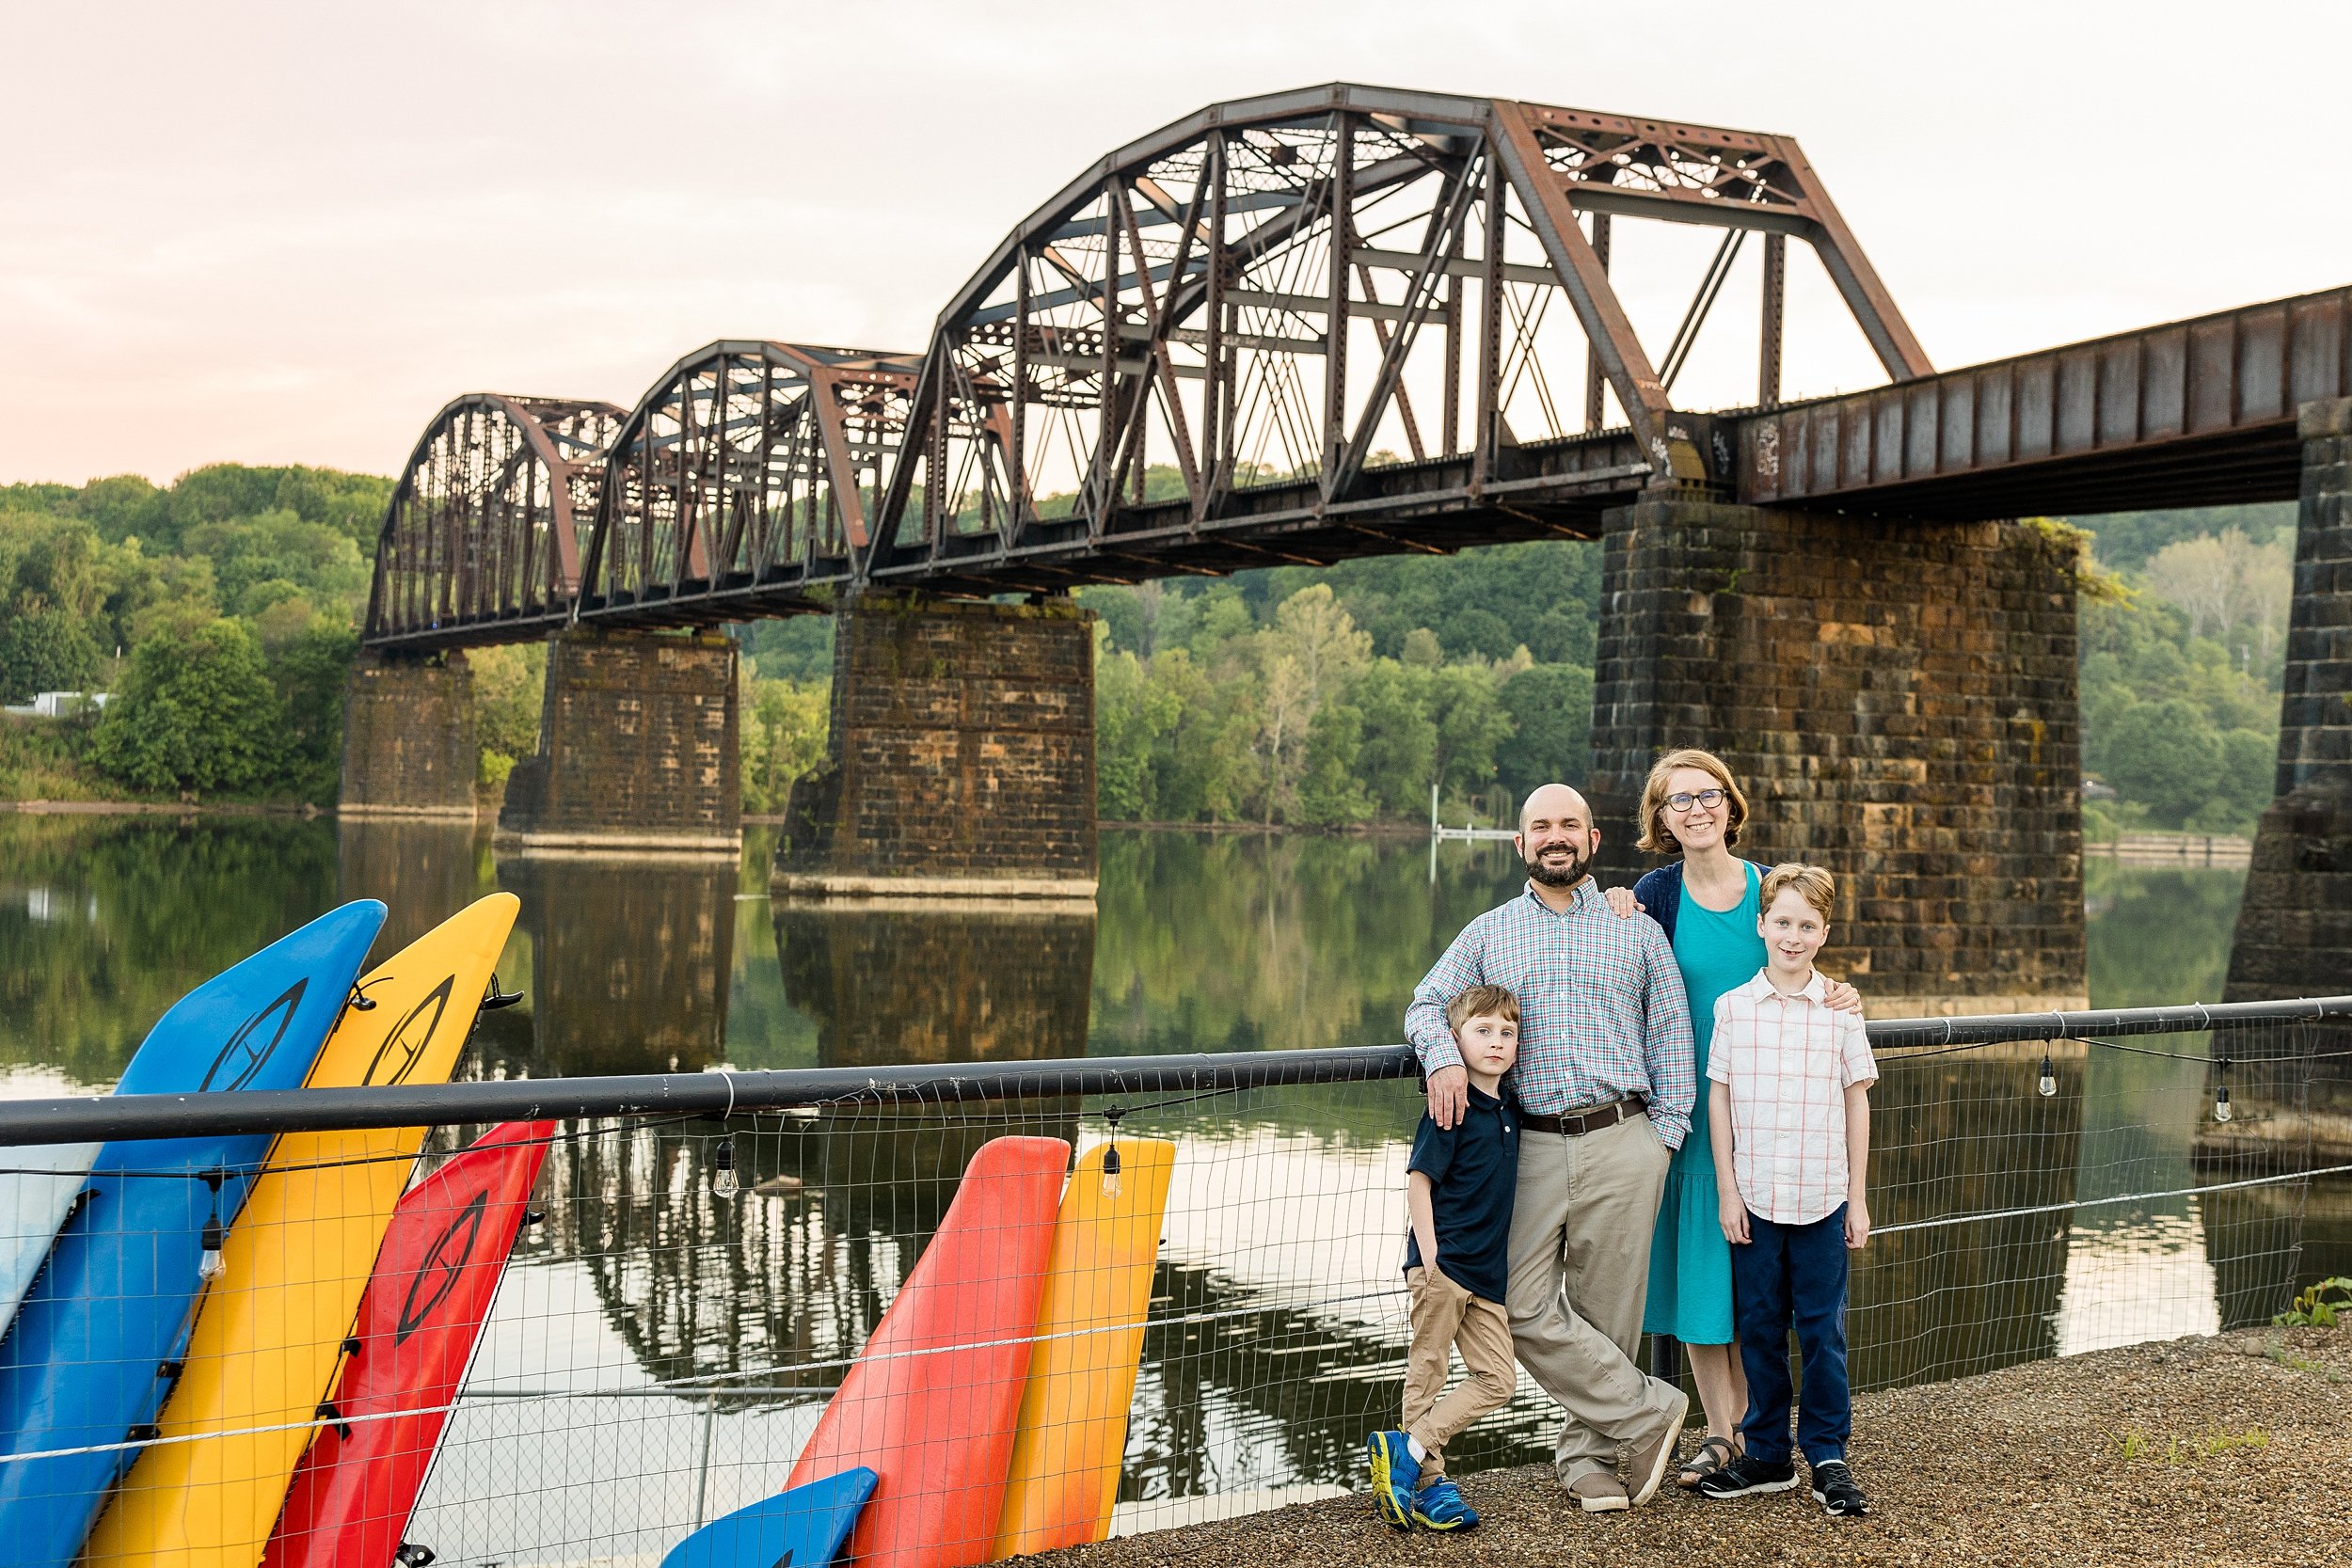 allegheny rivertrails park family photos, aspinwall family photographer, pittsburgh family photographer, zelienople family photographer